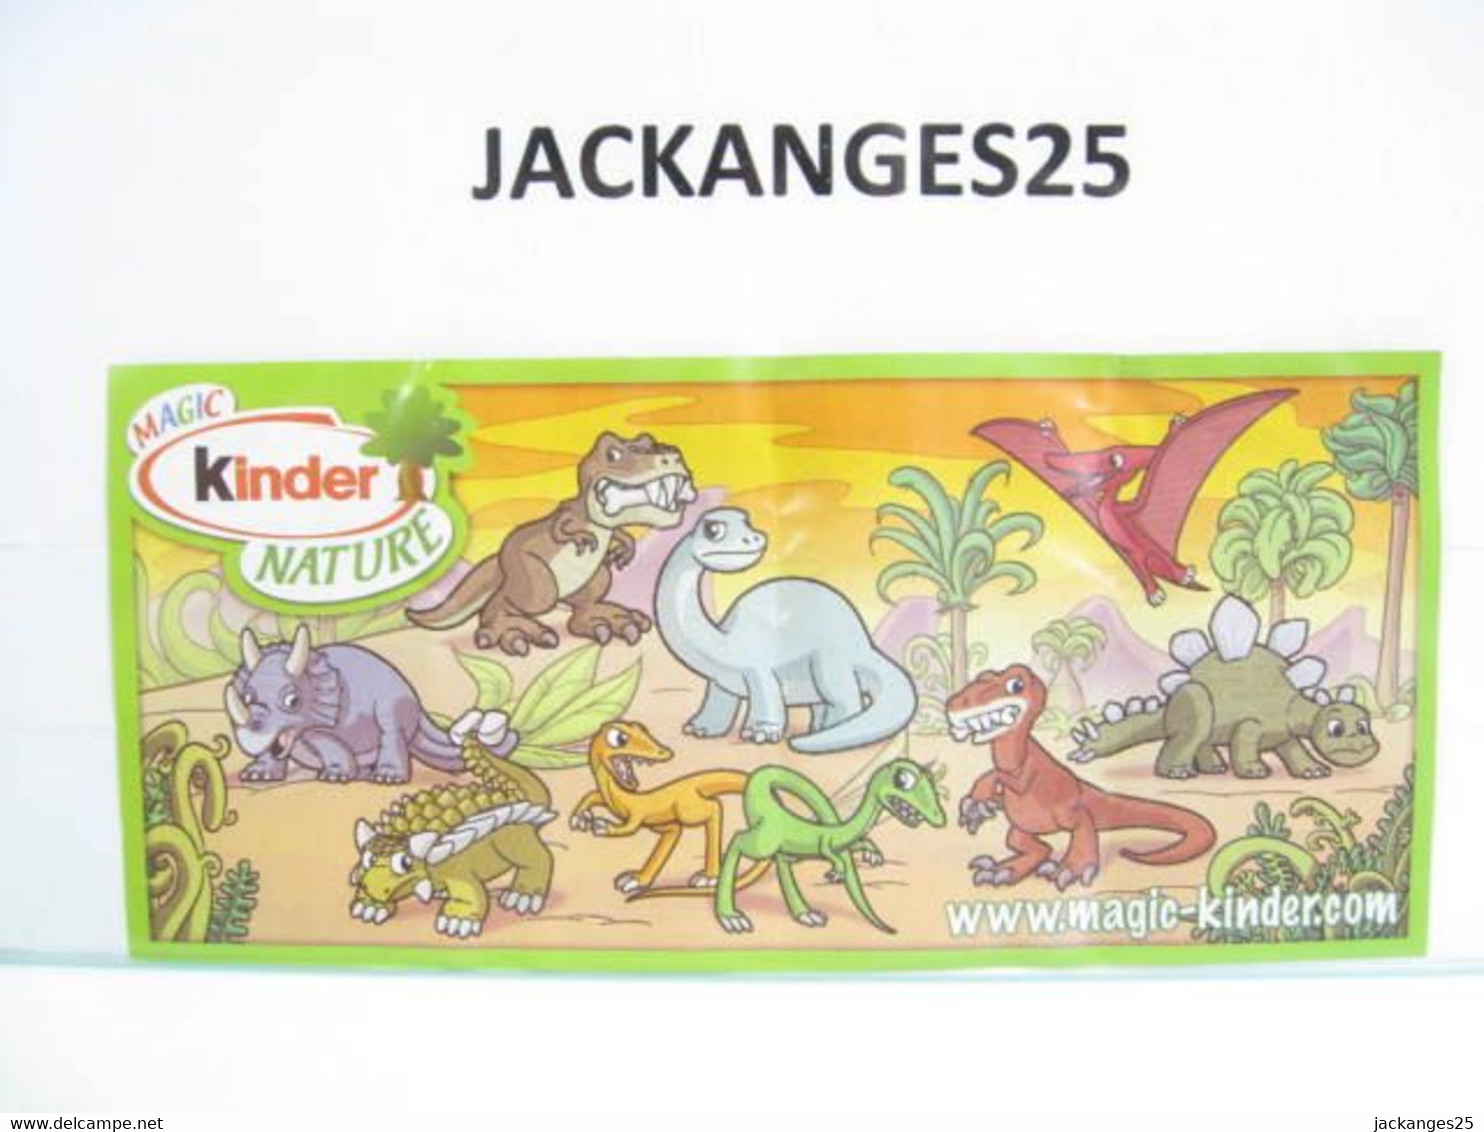 KINDER MPG UN 01 A DINOSAURE BRONTOSAURUS ANIMAUX NATURE NATOONS TIERE 2010 + BPZ A NATURE - Families